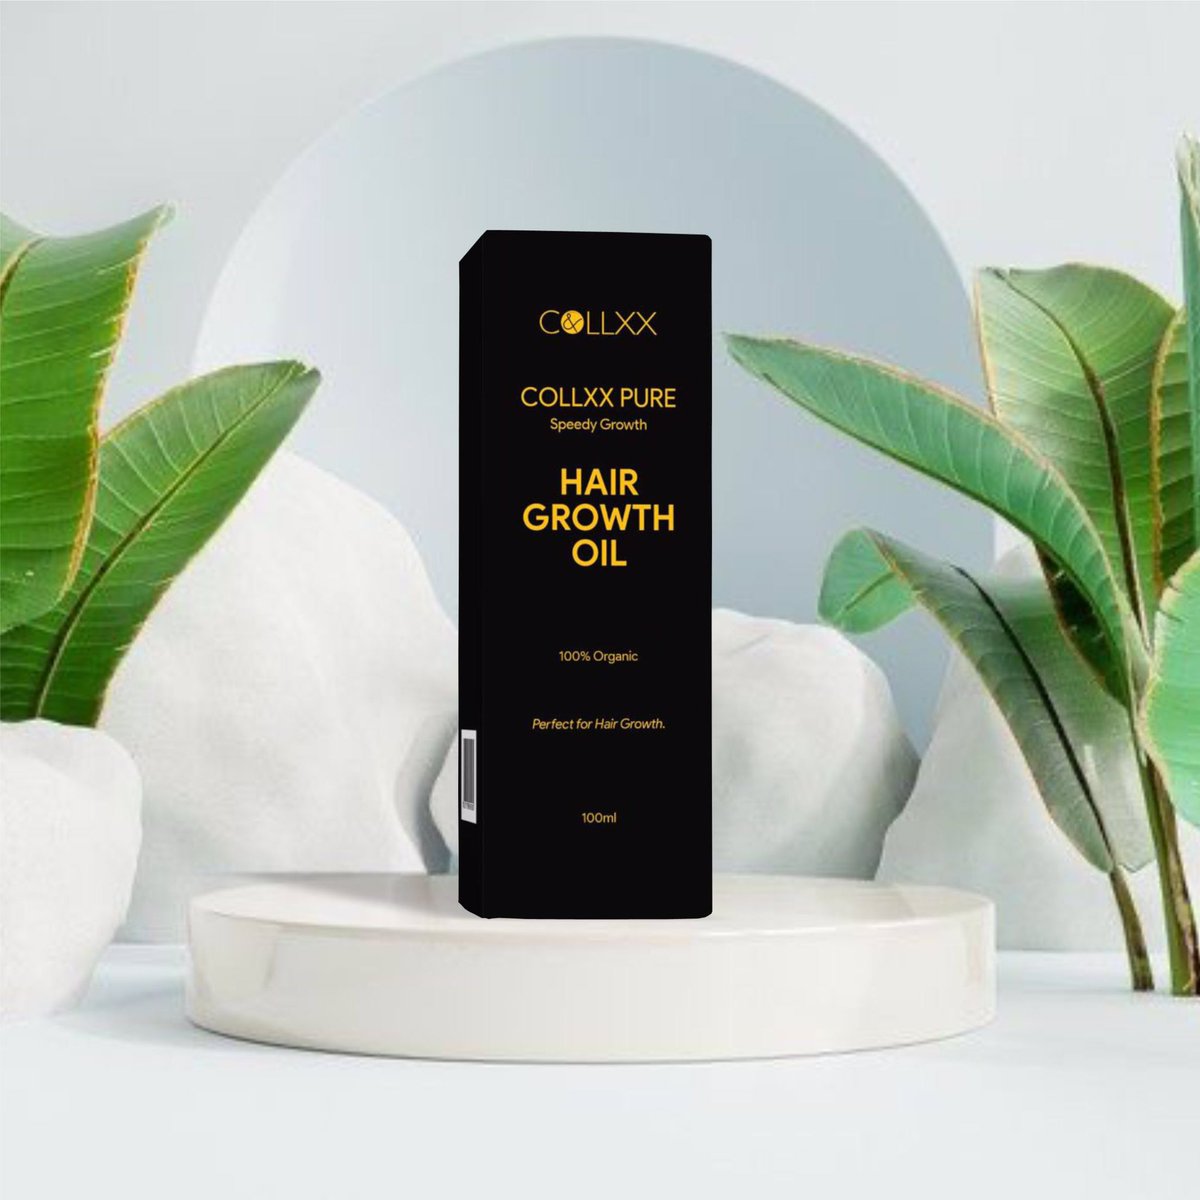 Experience the transformative power of Collxx Pure Beauty Hair Growth Oil. 

Embrace a journey towards healthier, longer, and more beautiful hair. 

📌 100% effective. 
🚚 Worldwide delivery 

Visit collxxpure.com to place your order.